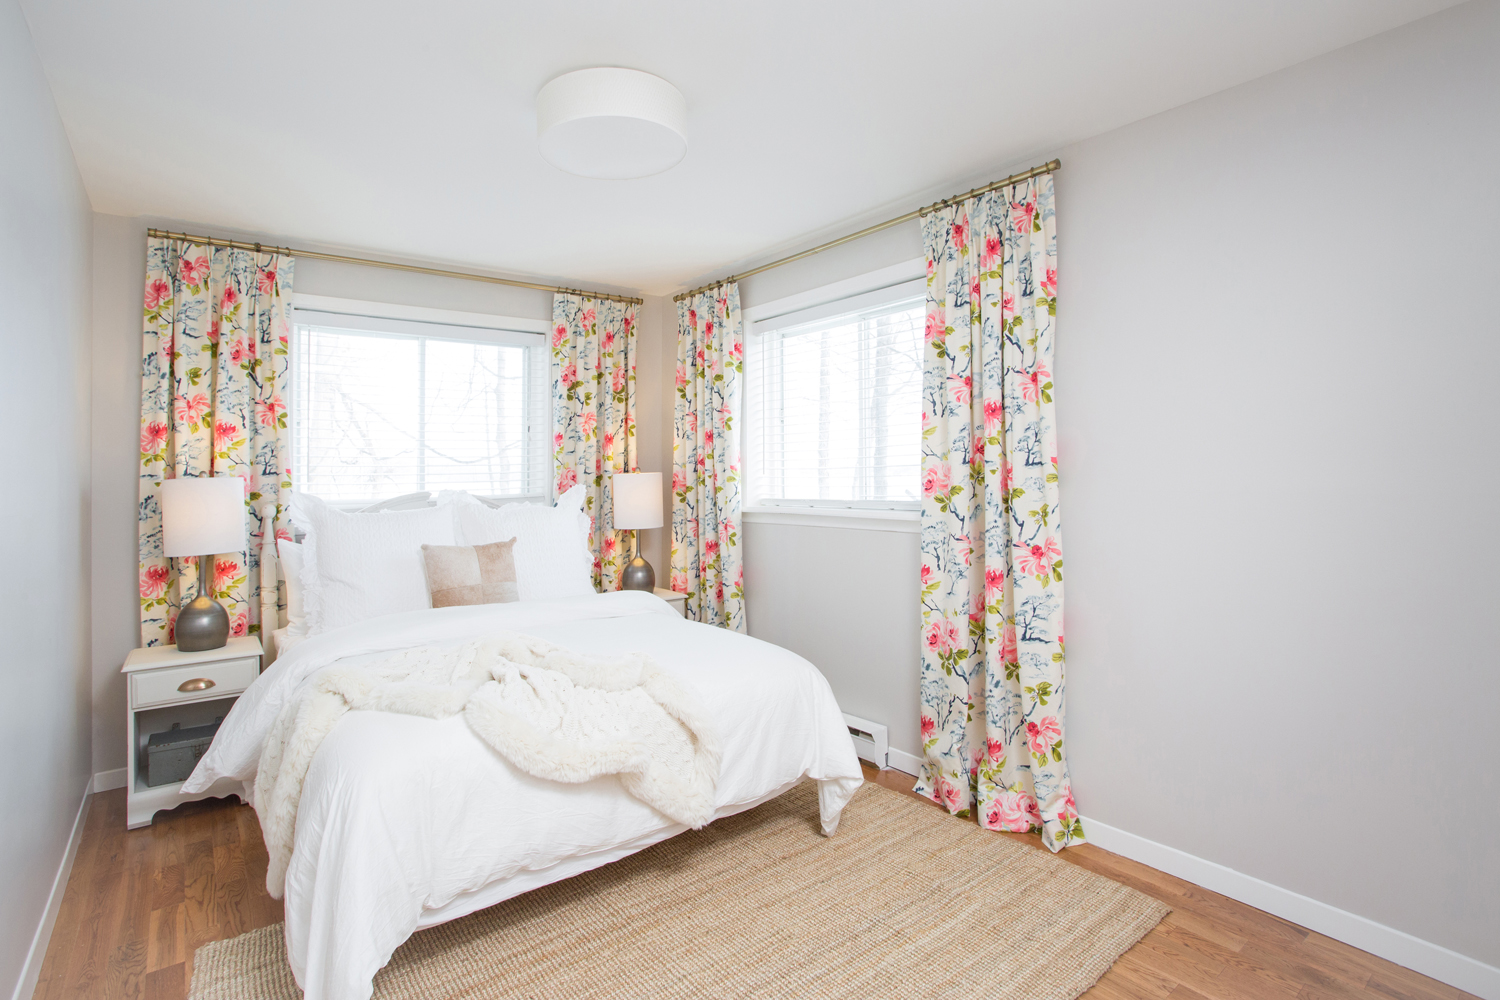 Pretty bedroom with floral curtains